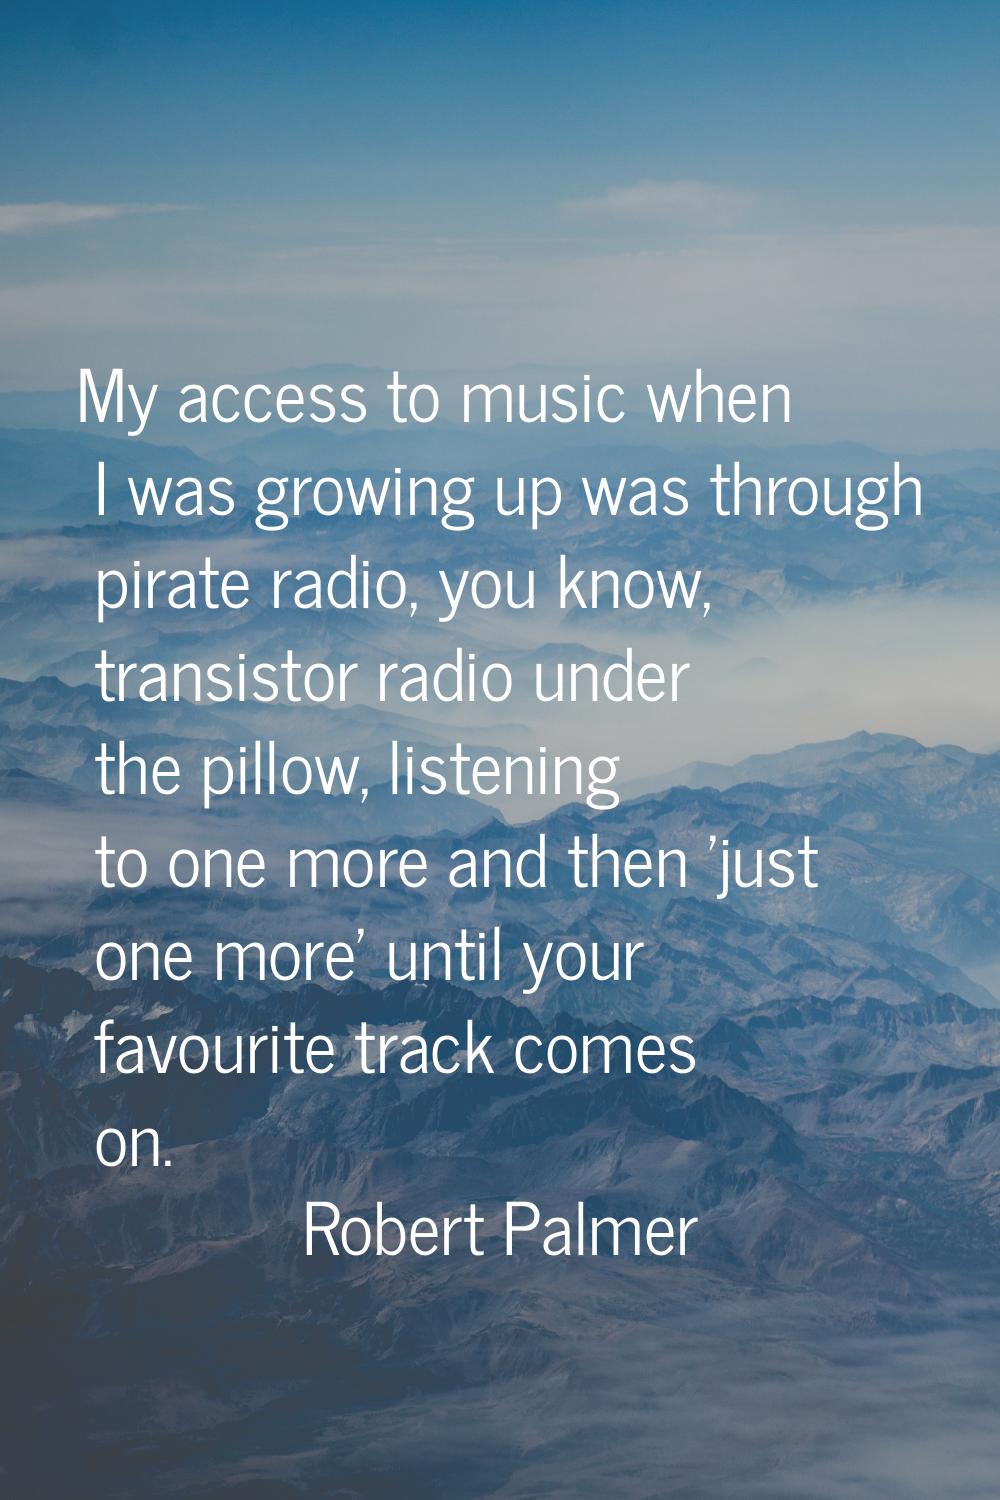 My access to music when I was growing up was through pirate radio, you know, transistor radio under